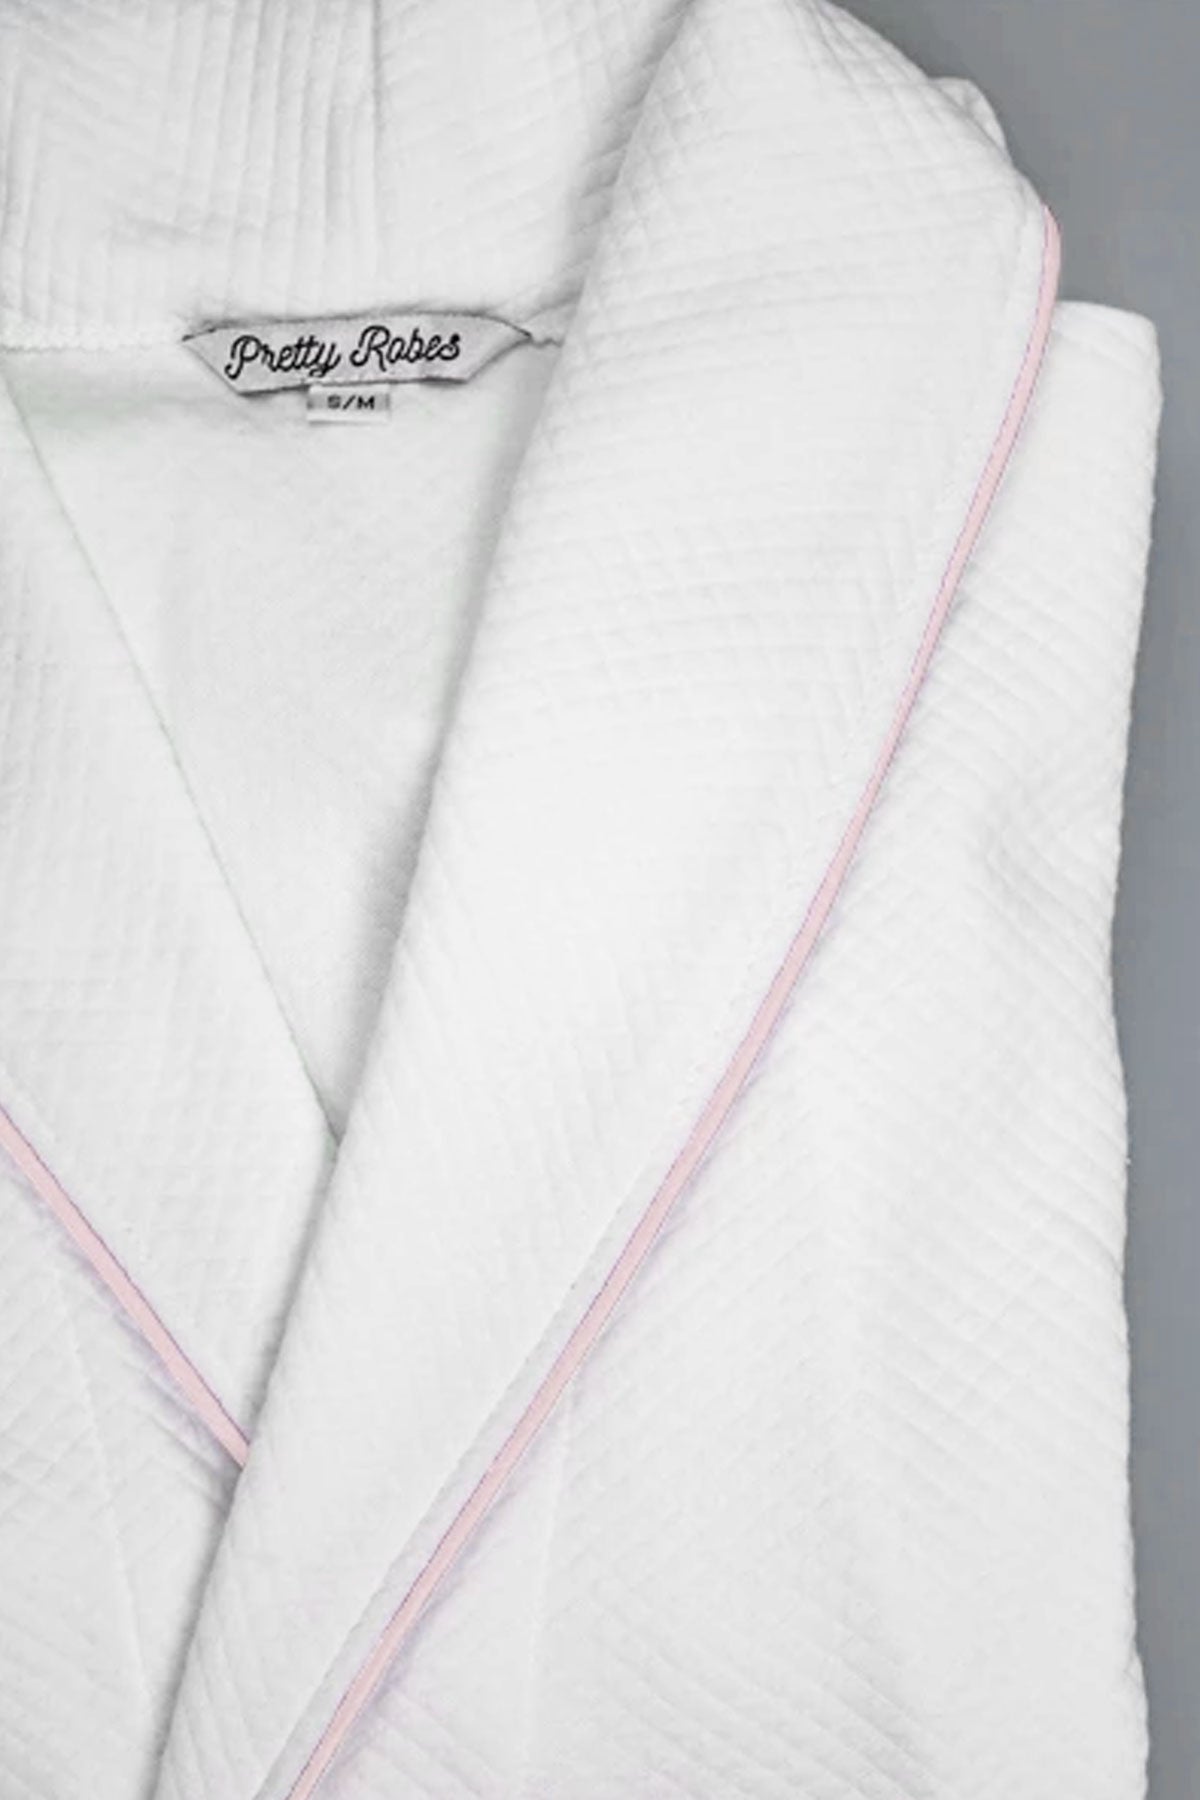 Grid Style Bath Robe White with Light Pink Piping